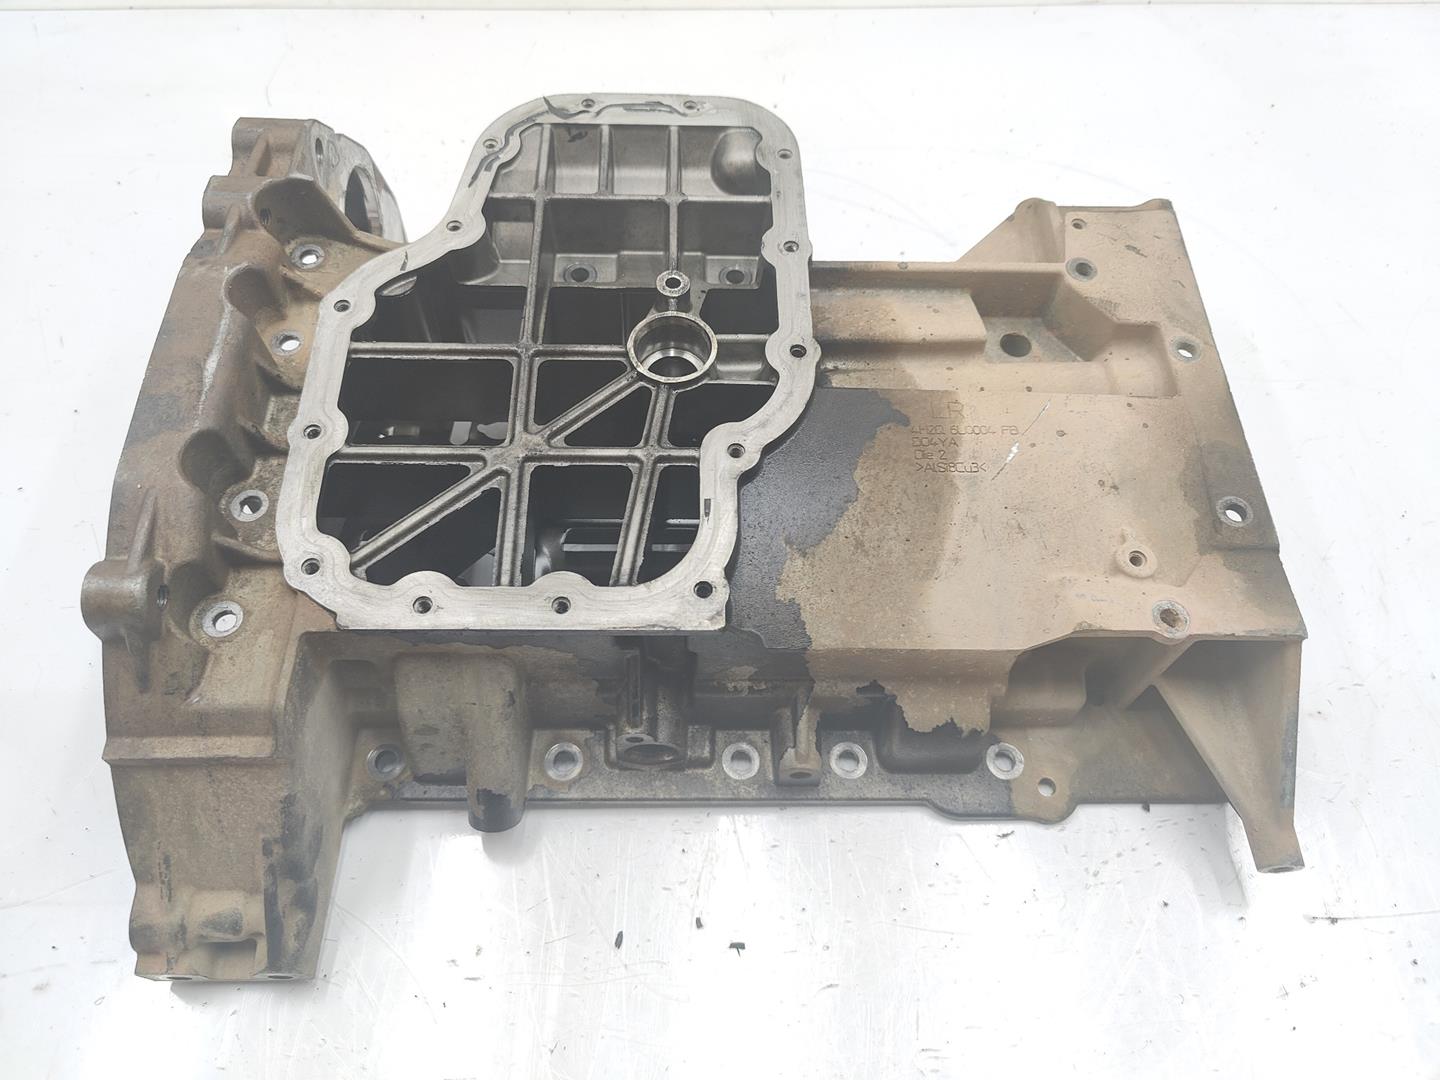 LAND ROVER Discovery 3 generation (2004-2009) Other Engine Compartment Parts 4H2Q6U0004FB, LR011693, 4H2Q6U004FC 24125860